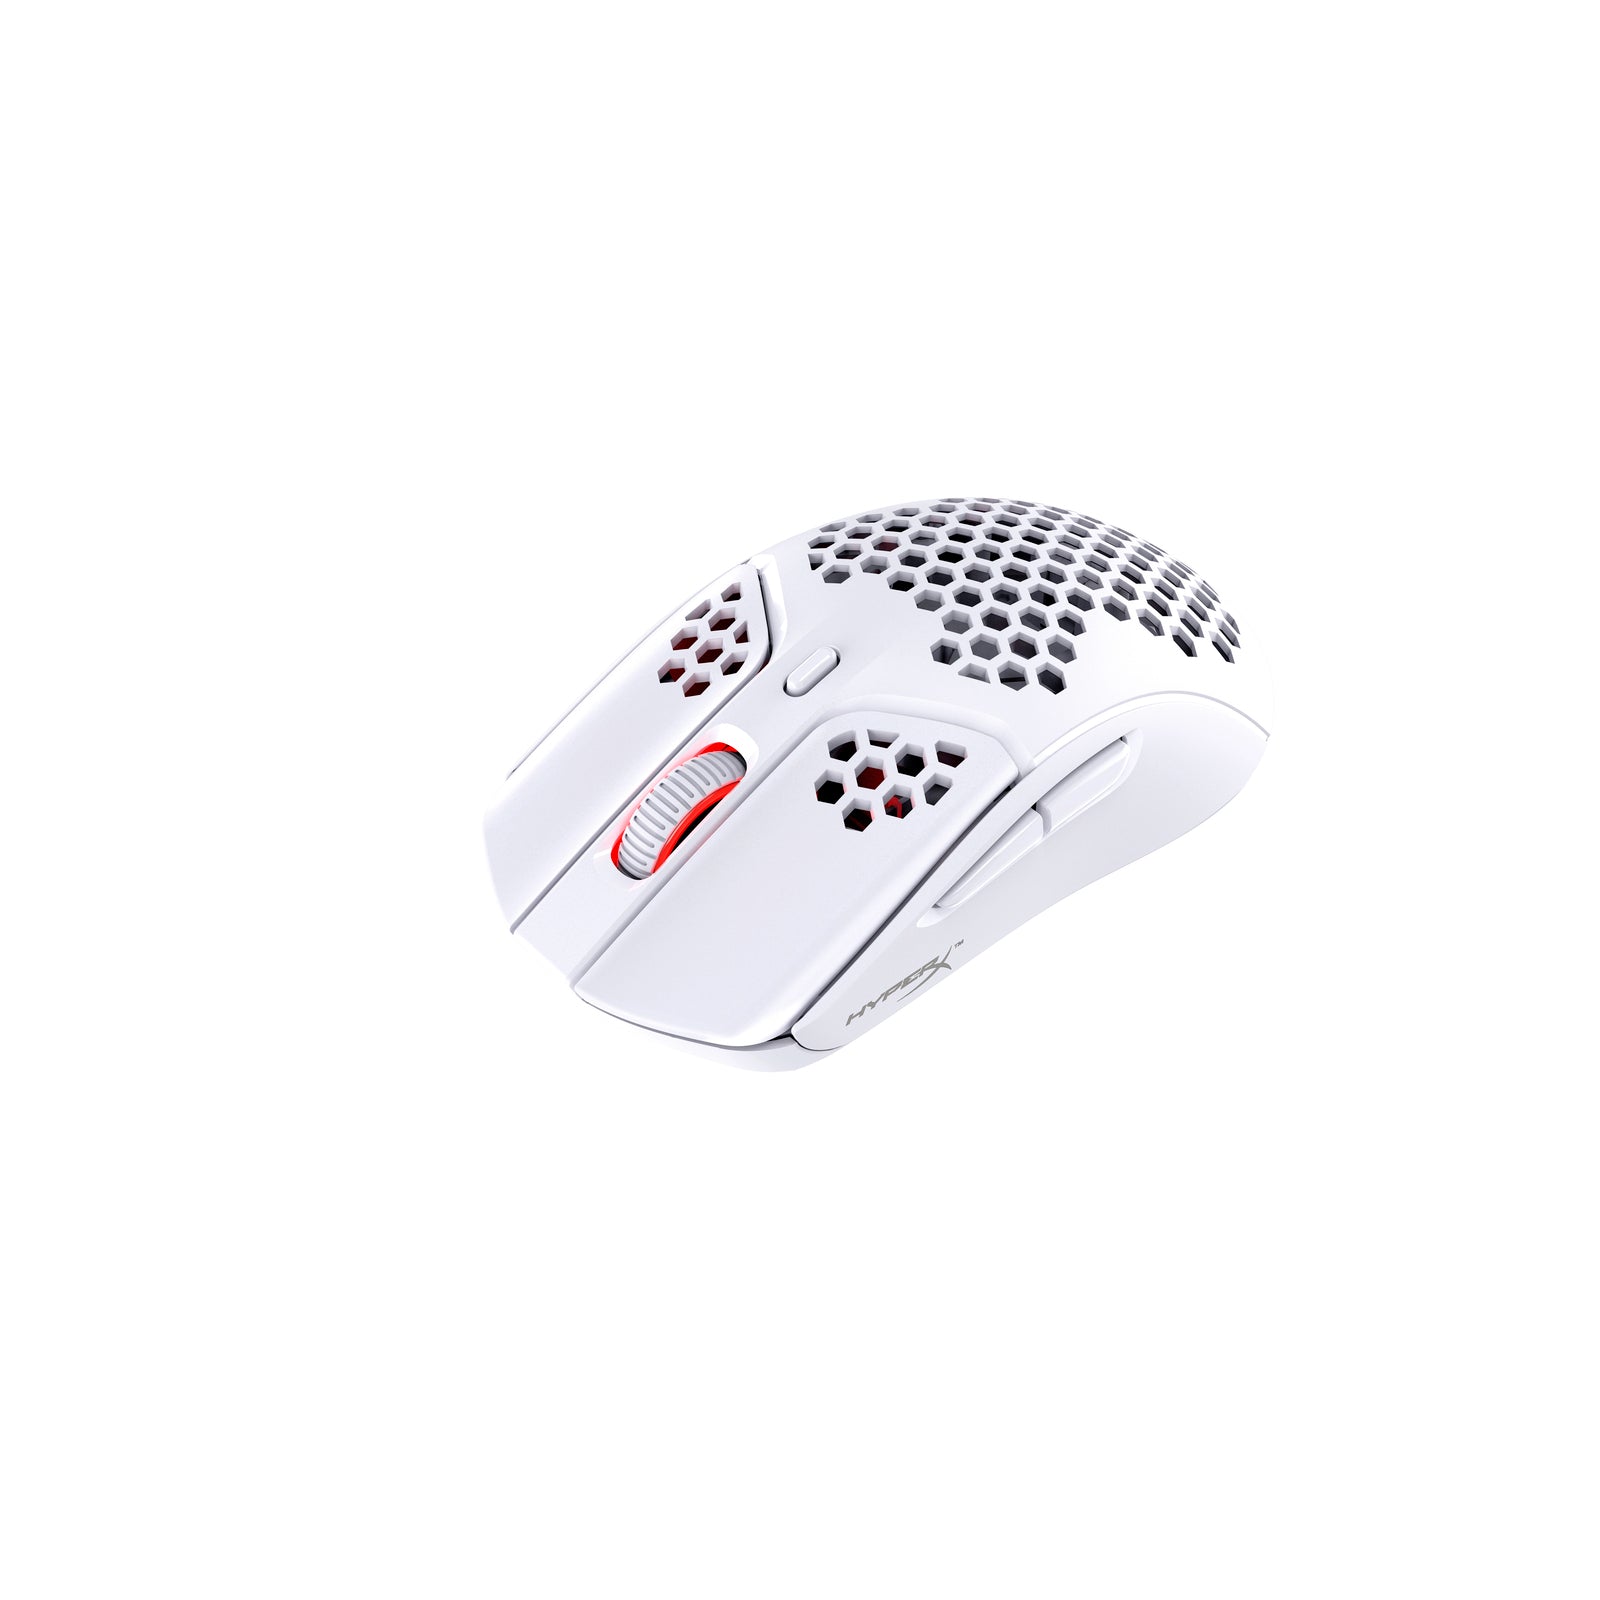 HyperX Pulsefire Haste White Wireless White Gaming Mouse - angled view from the left side